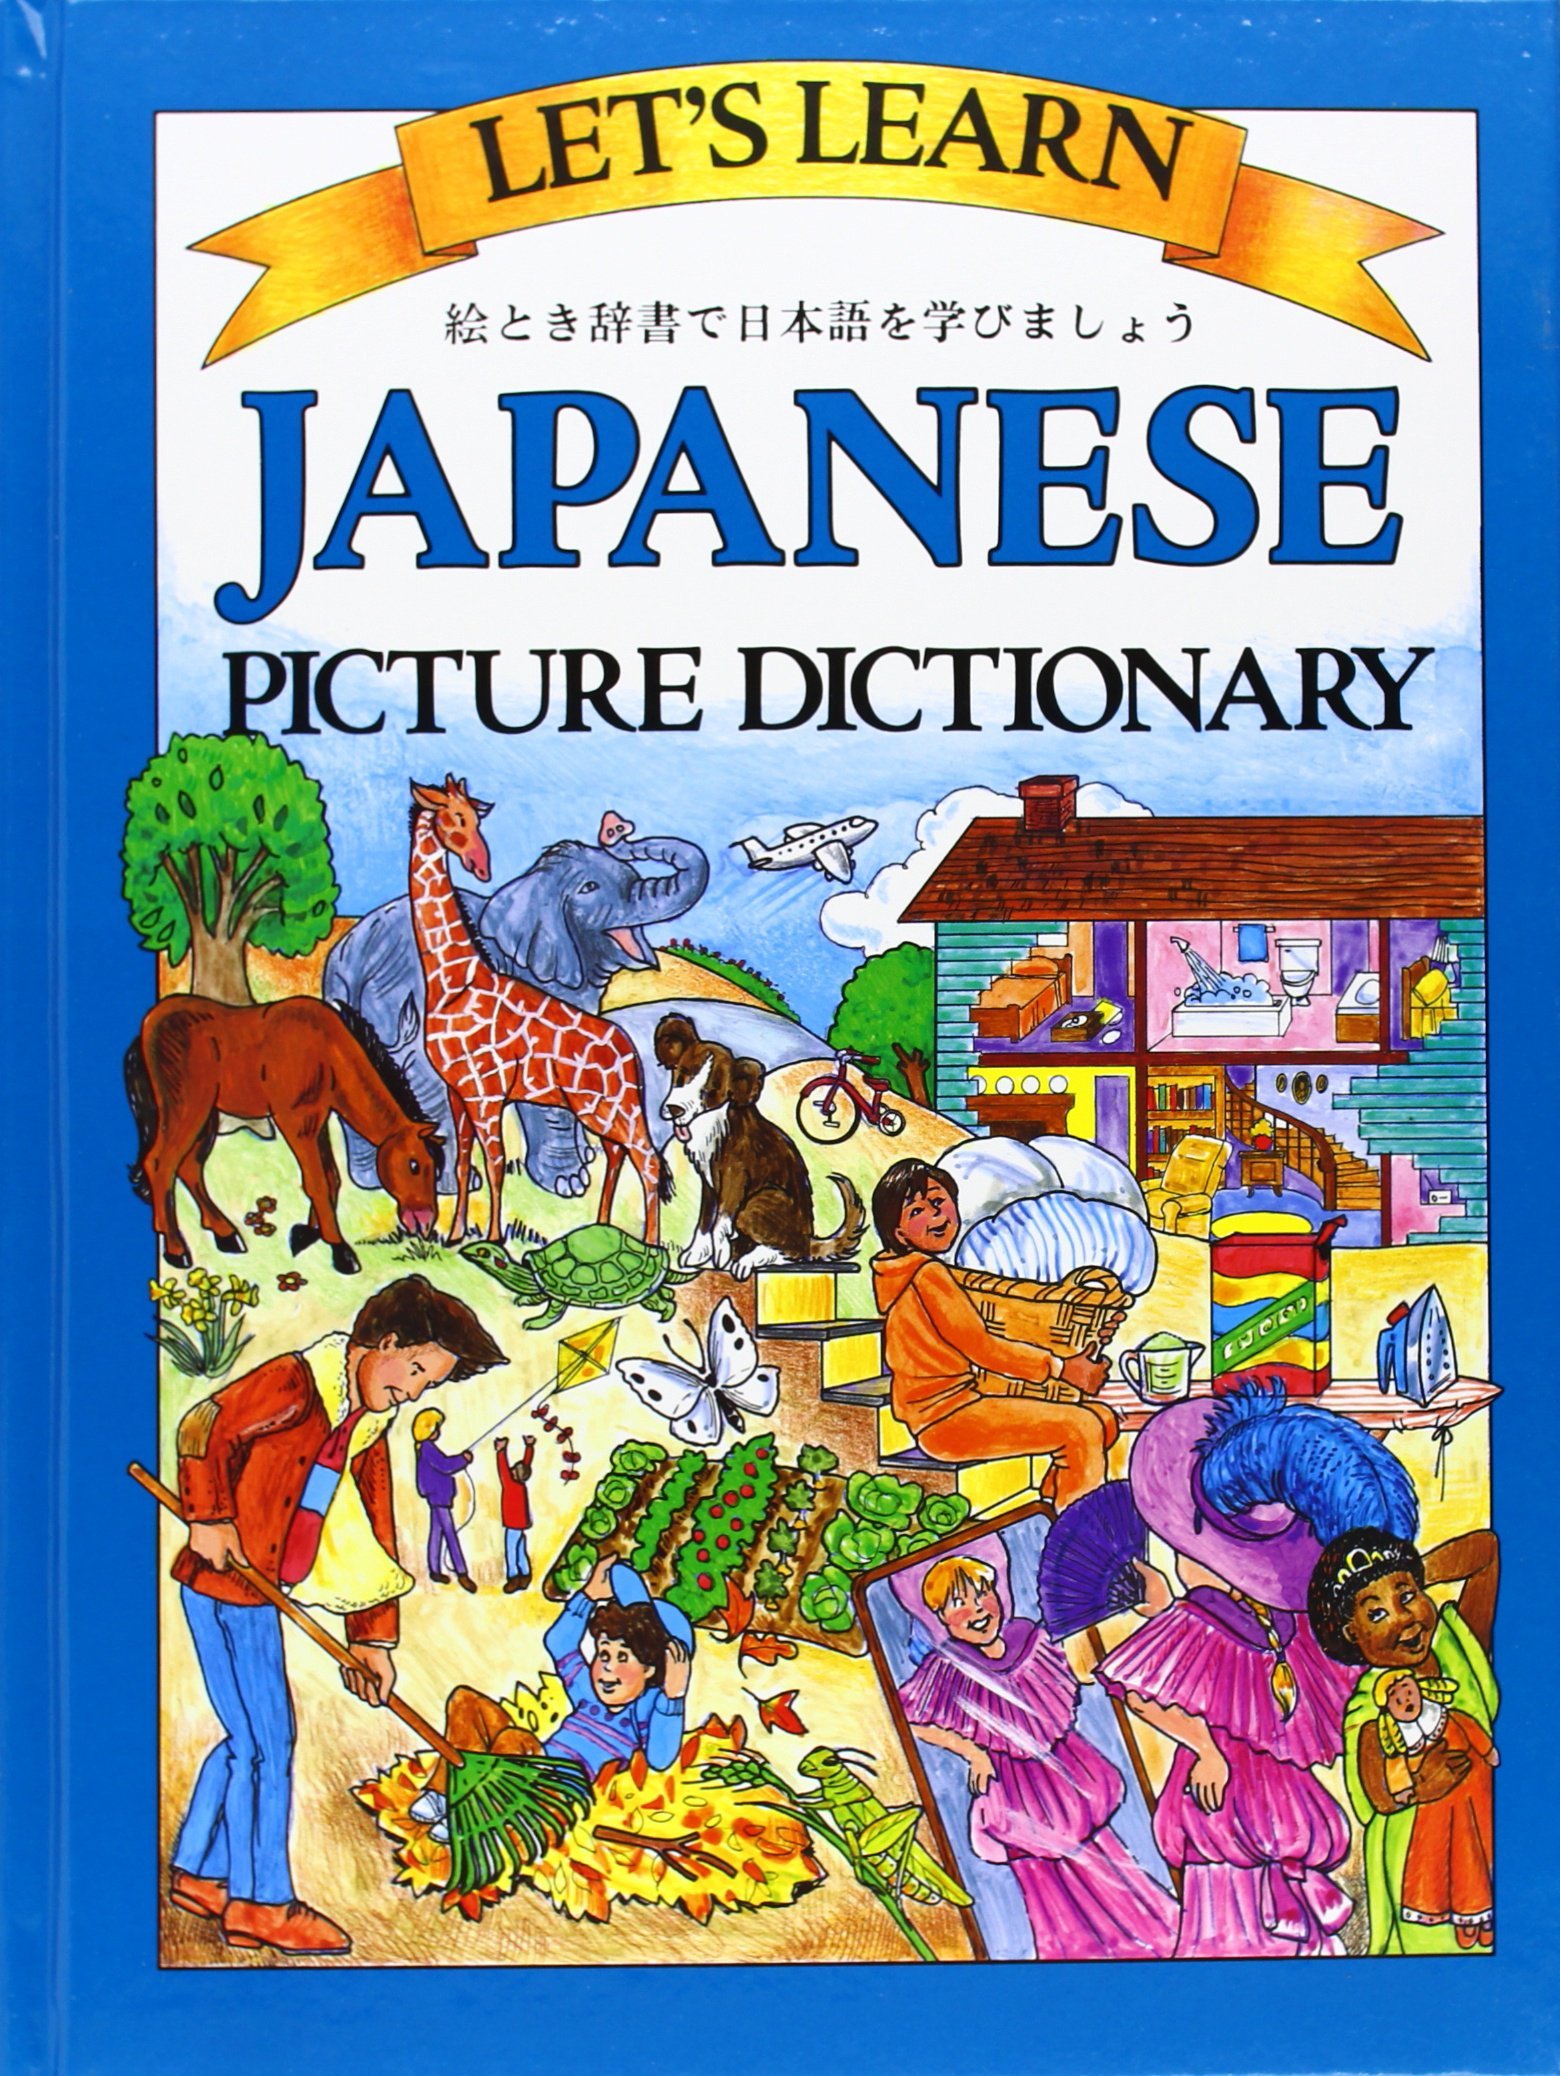 Download Let's Learn Japanese Picture Dictionary - SoftArchive